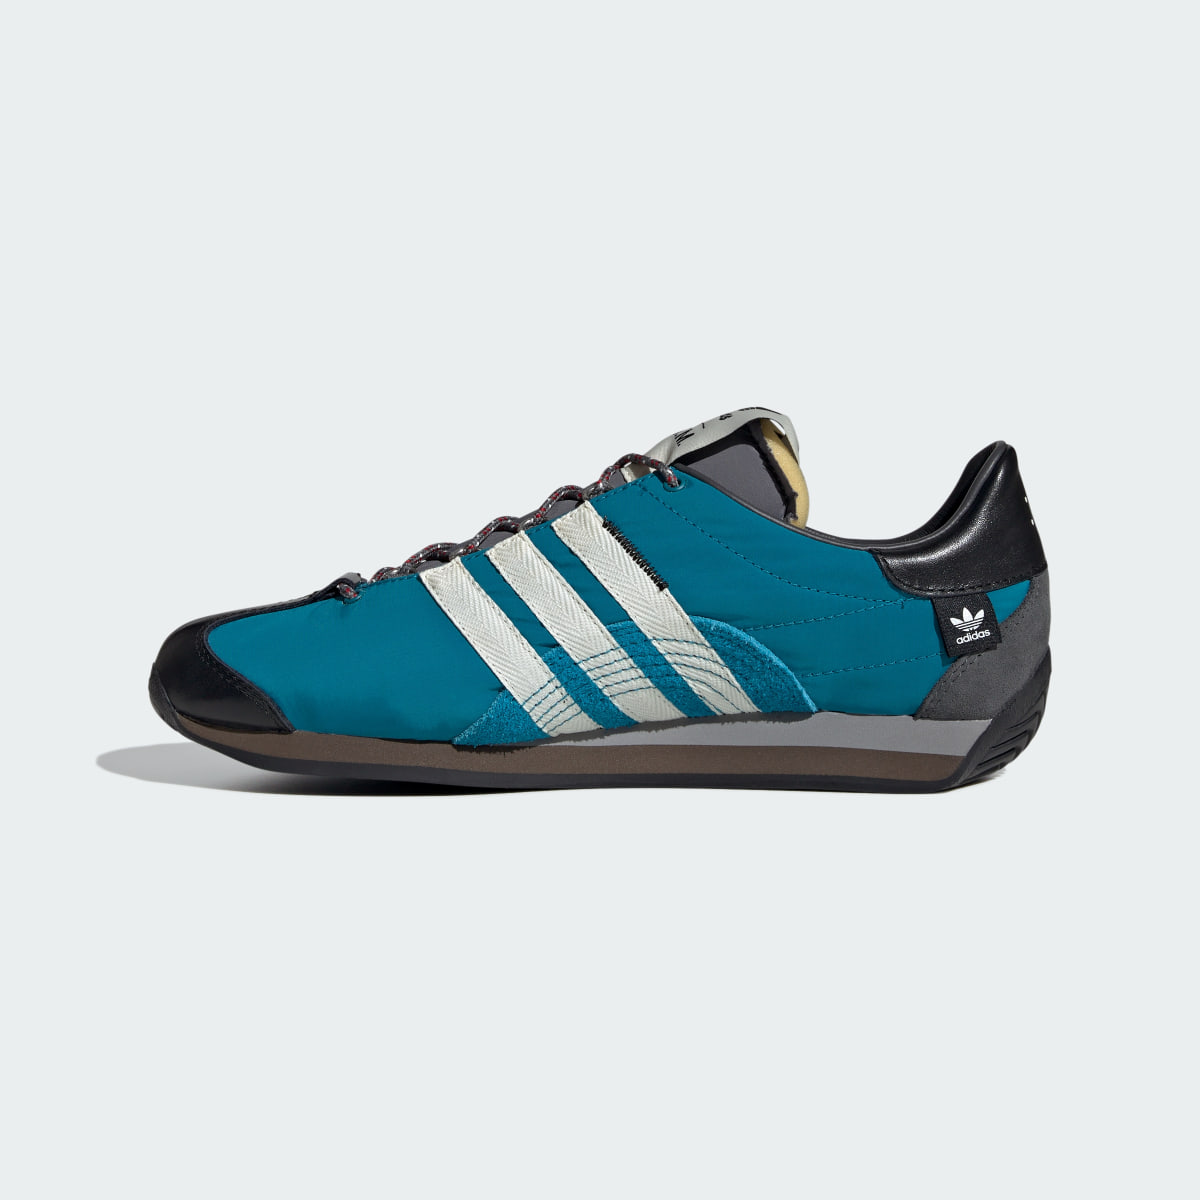 Adidas SFTM Country OG Low Trainers. 8